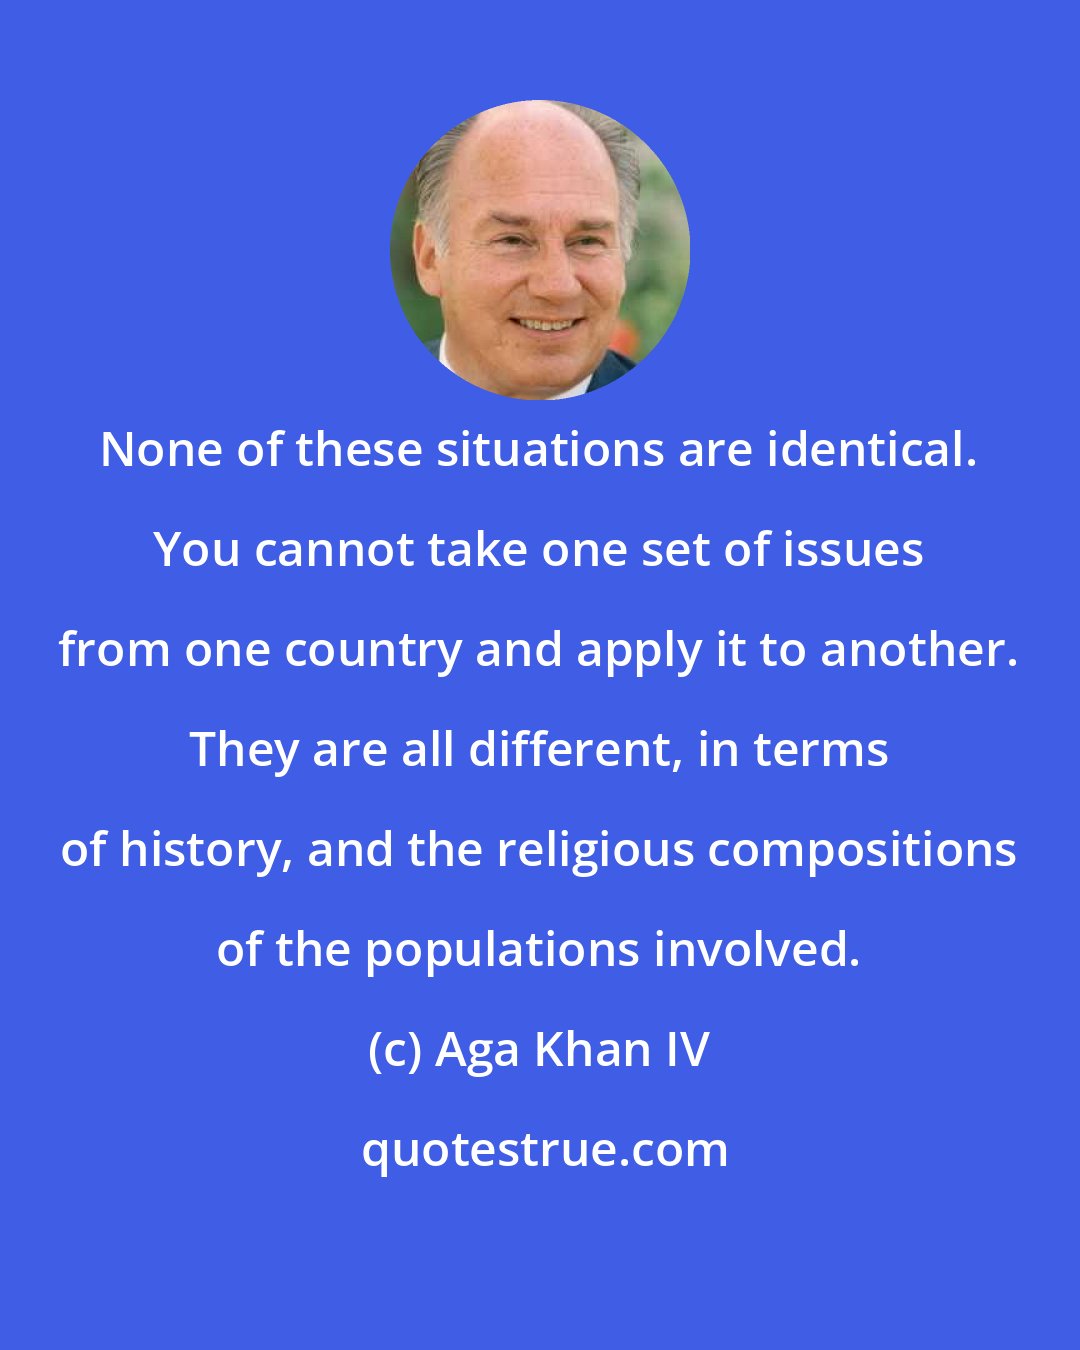 Aga Khan IV: None of these situations are identical. You cannot take one set of issues from one country and apply it to another. They are all different, in terms of history, and the religious compositions of the populations involved.